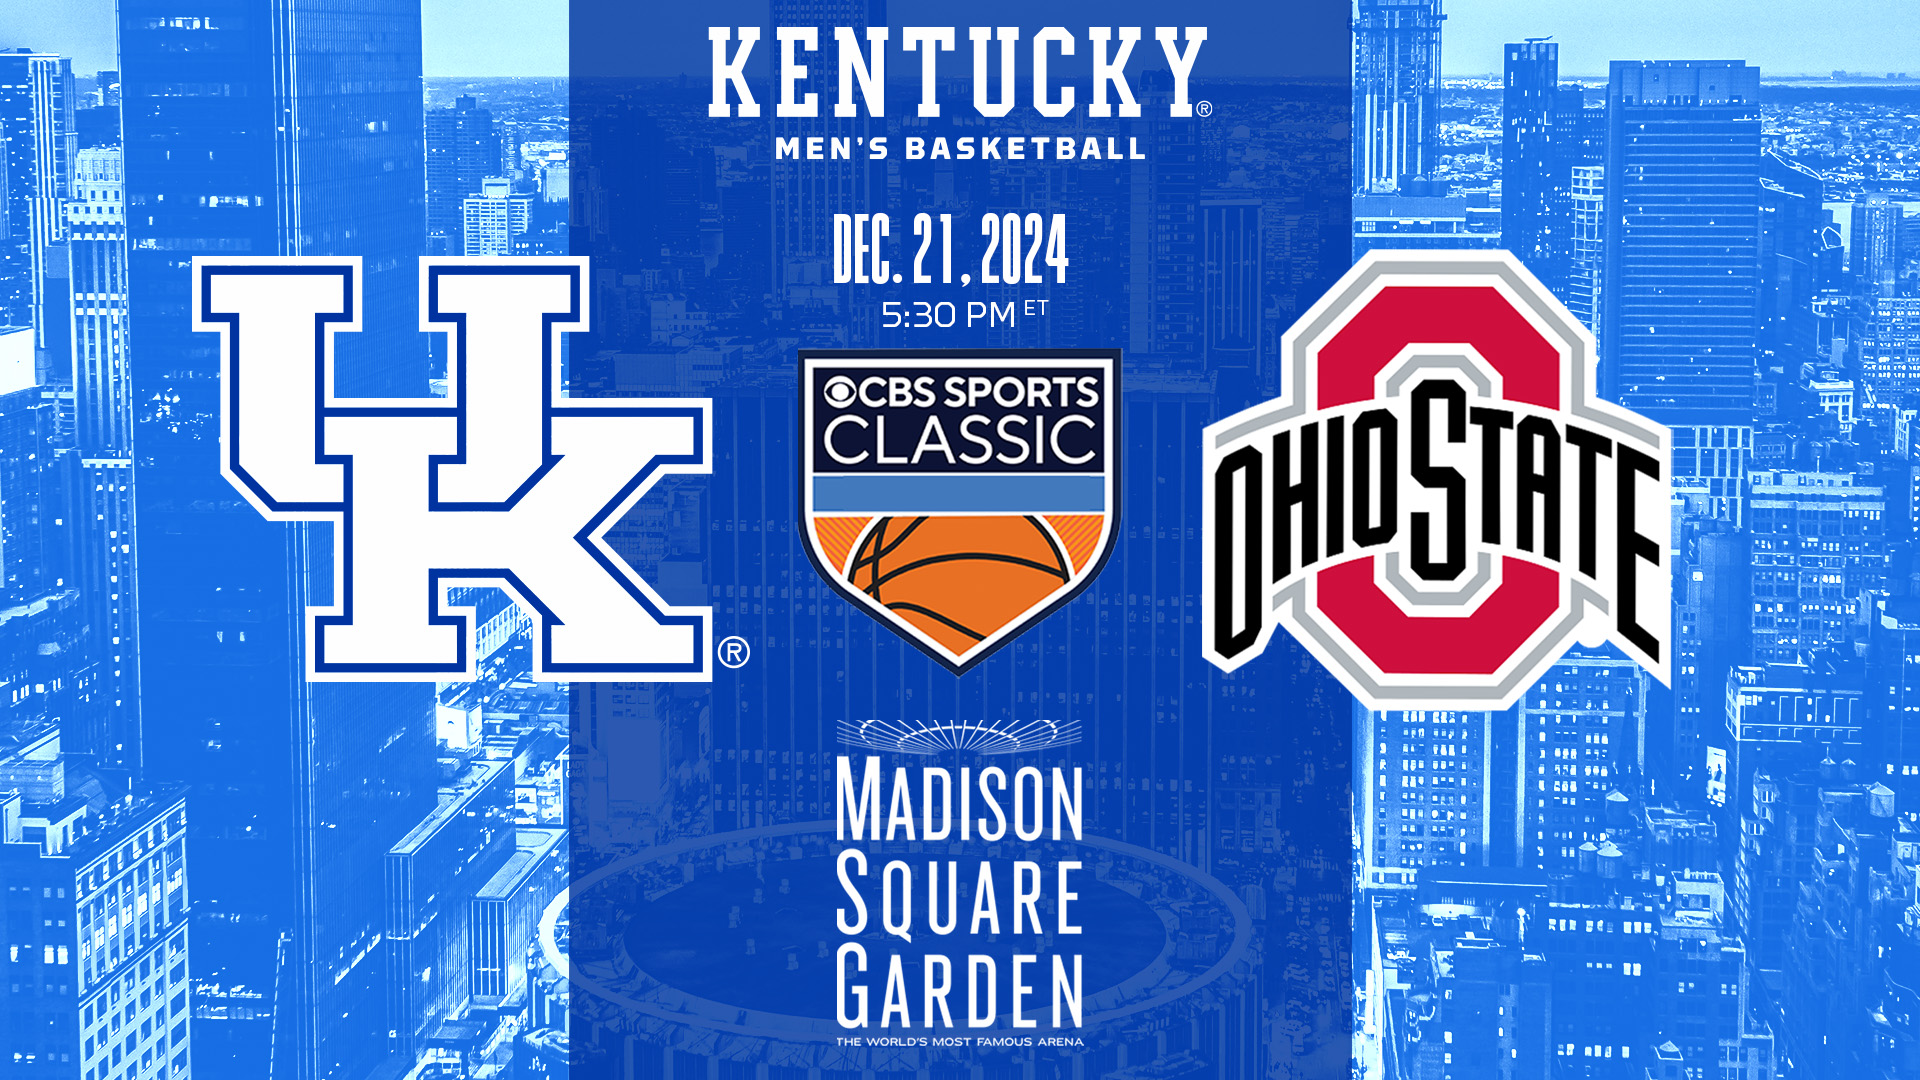 Kentucky Returns to CBS Sports Classic to Face Ohio State